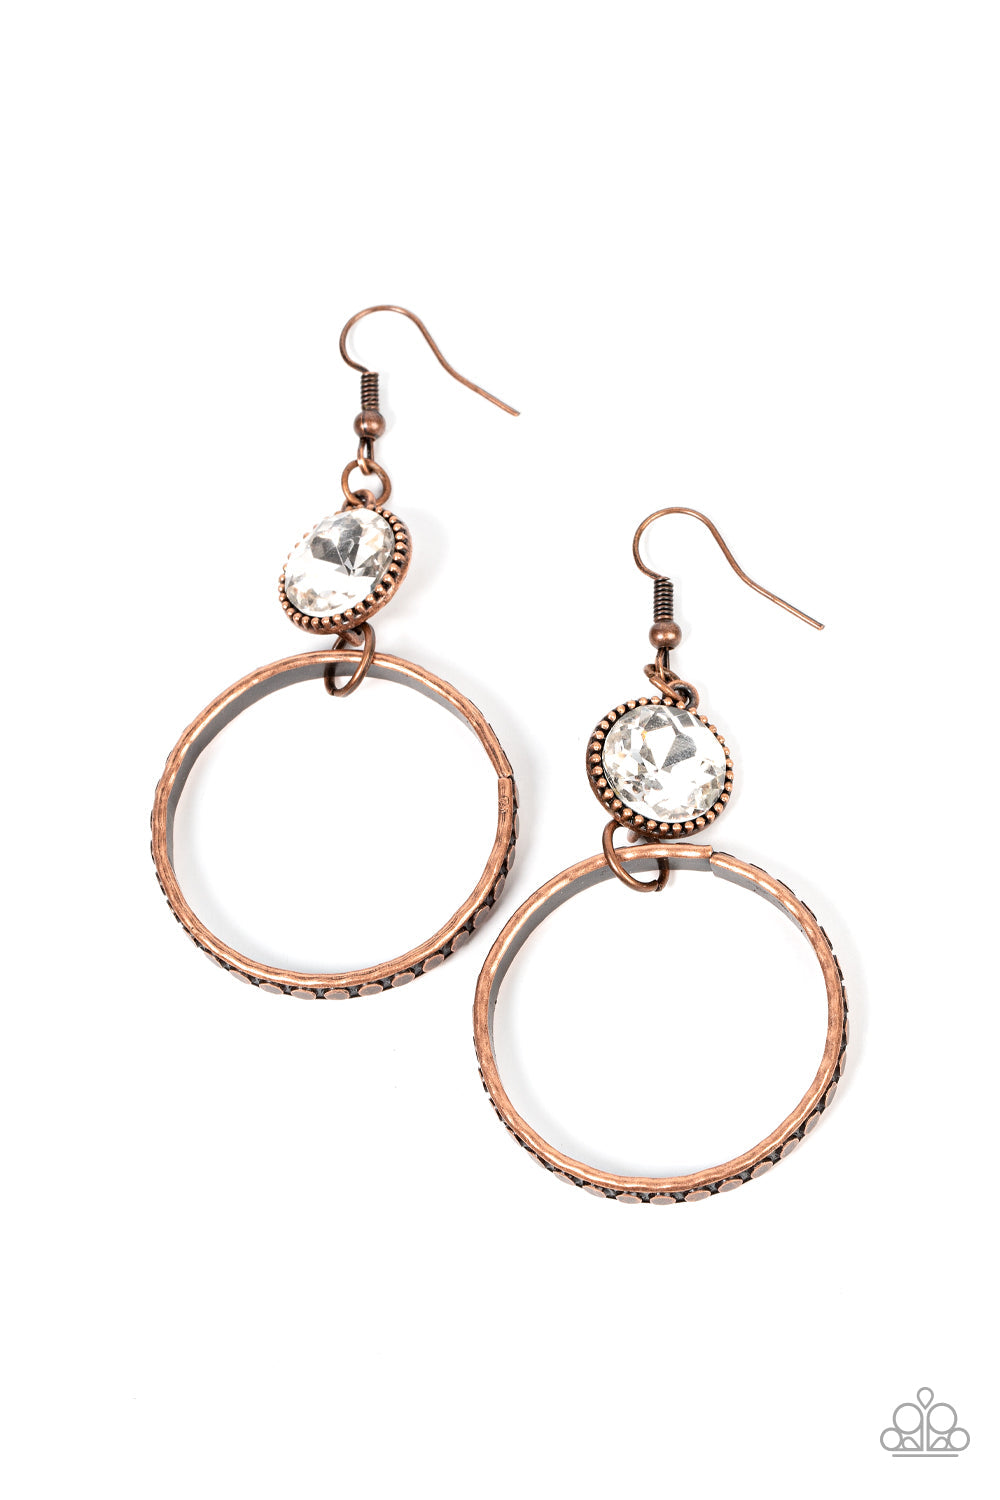 Standalone Sparkle - Copper Fashion Earrings - Paparazzi Accessories - Antiqued copper ring is stamped with a flattened dot motif swings below a dramatic white rhinestone, creating upscale, rustic modern fashion earrings. Great for special occasions or everyday casual wear.